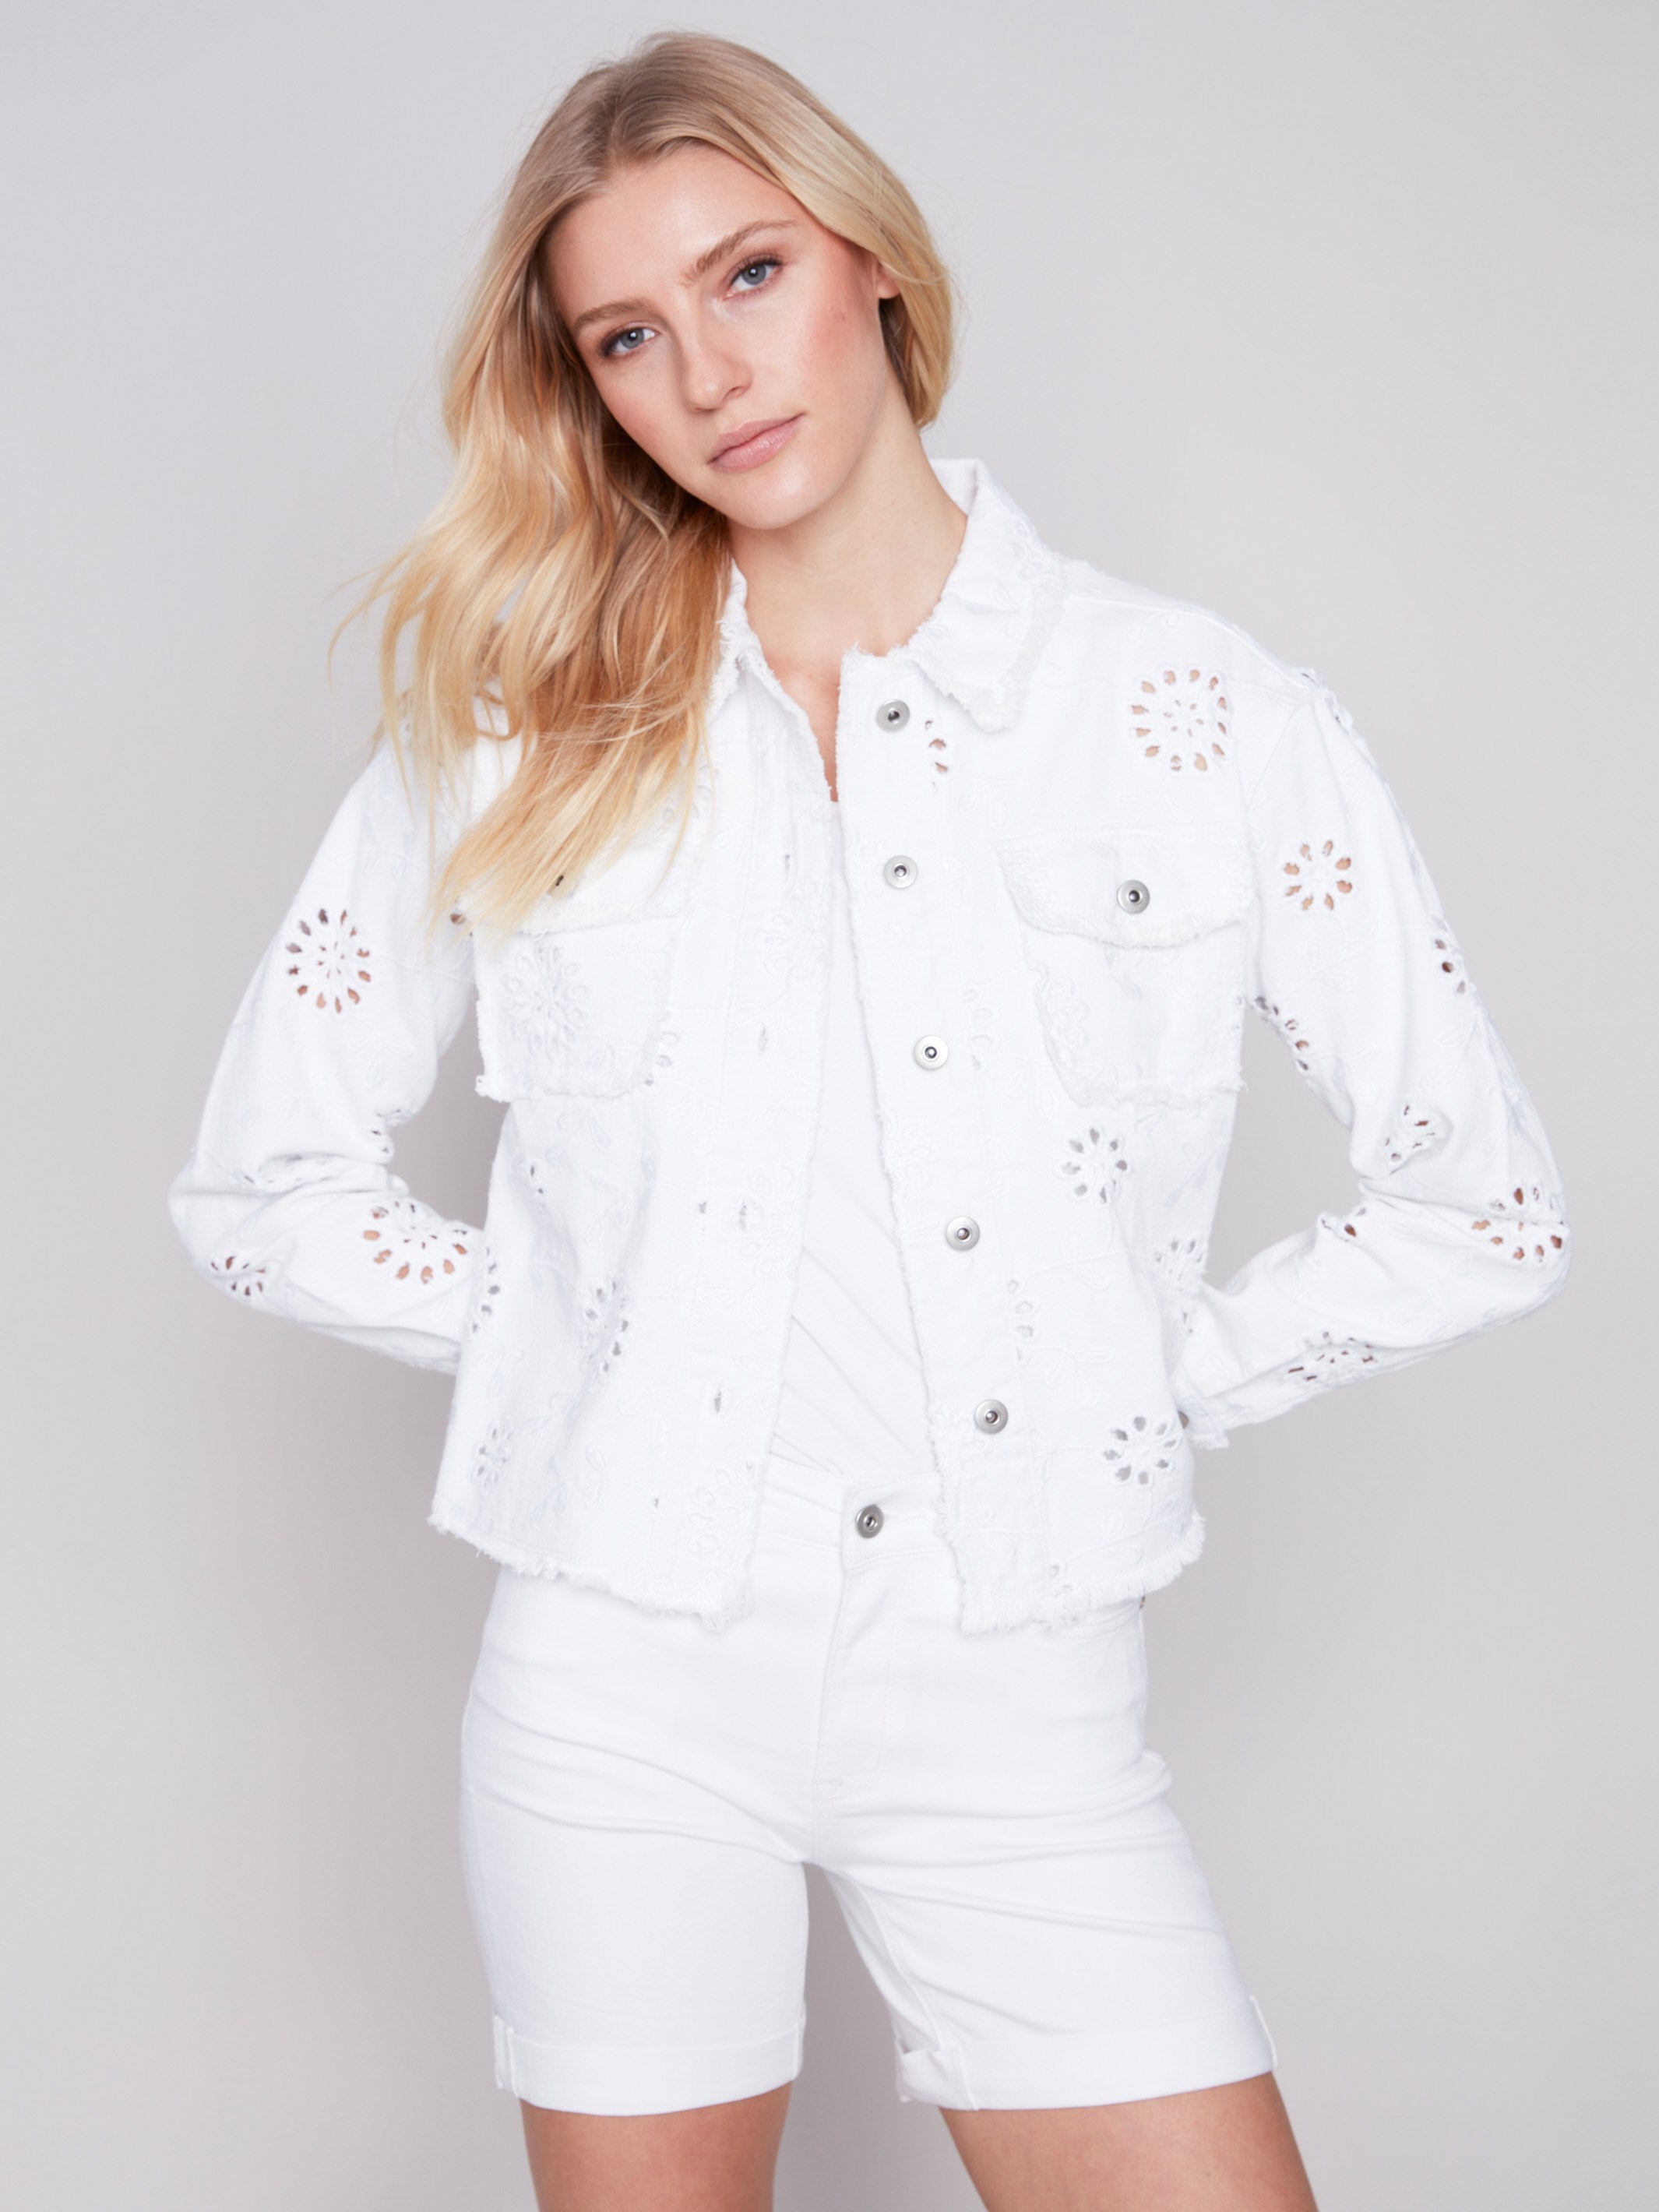 Embroidered Eyelet Denim Jacket - White - Charlie B Collection Canada - Image 2